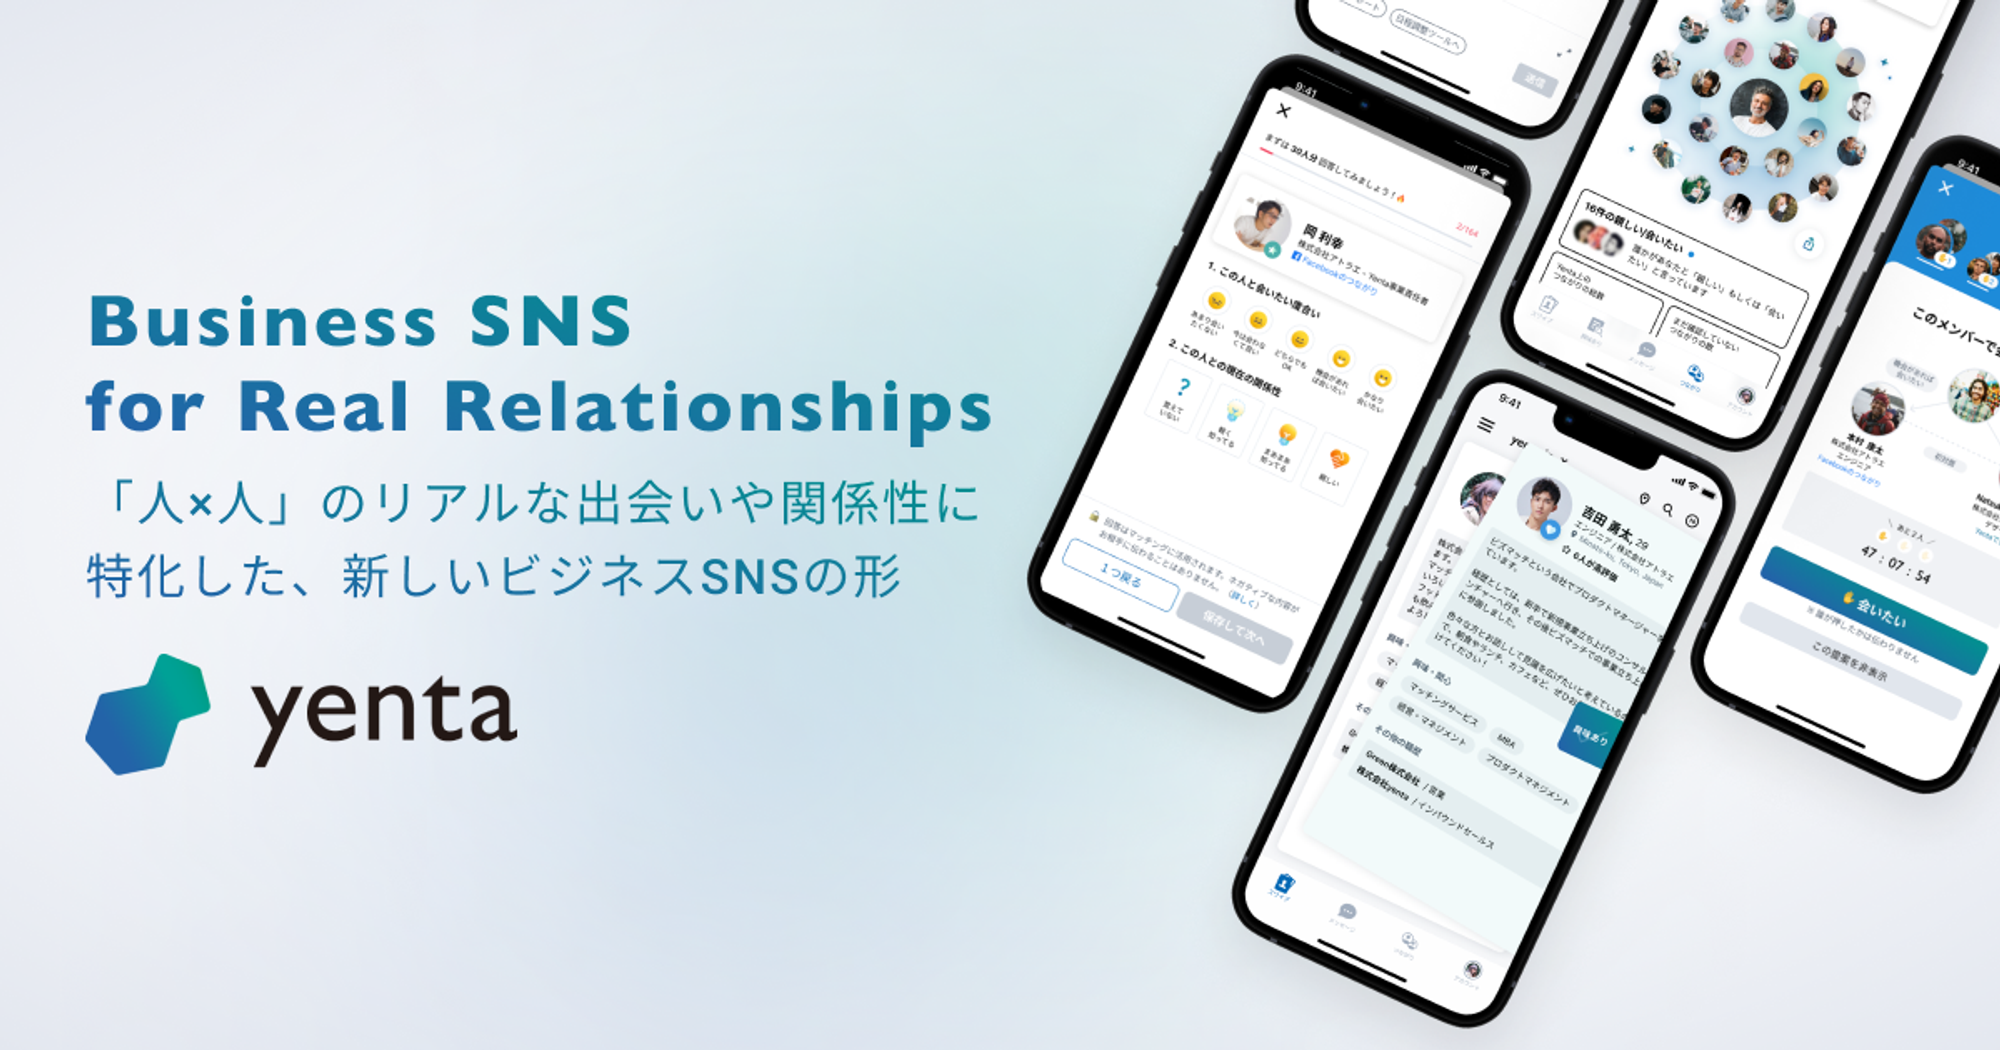 Yenta | Business SNS for Real Relationships.